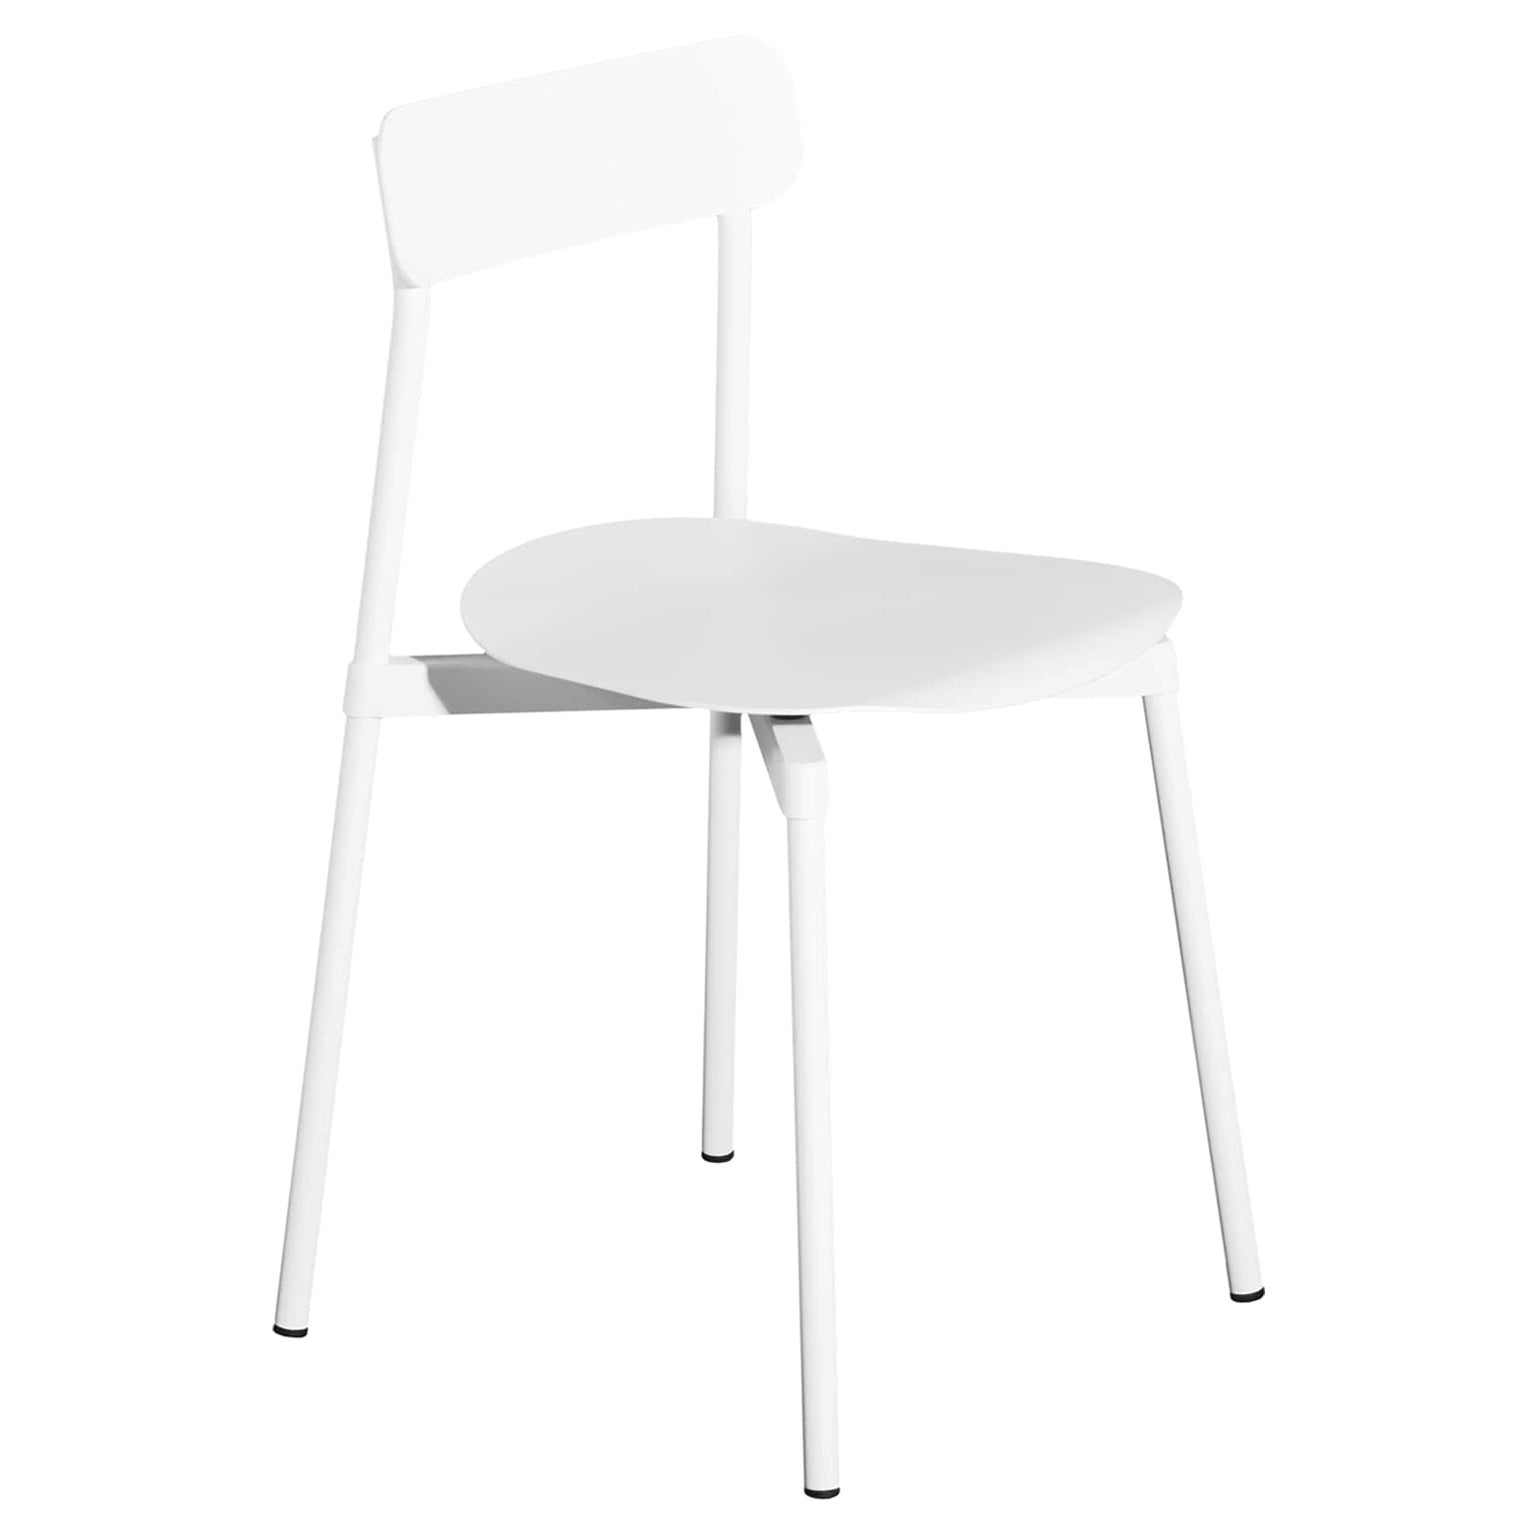 Petite Friture Fromme Chair in White Aluminium by Tom Chung, 2019 For Sale